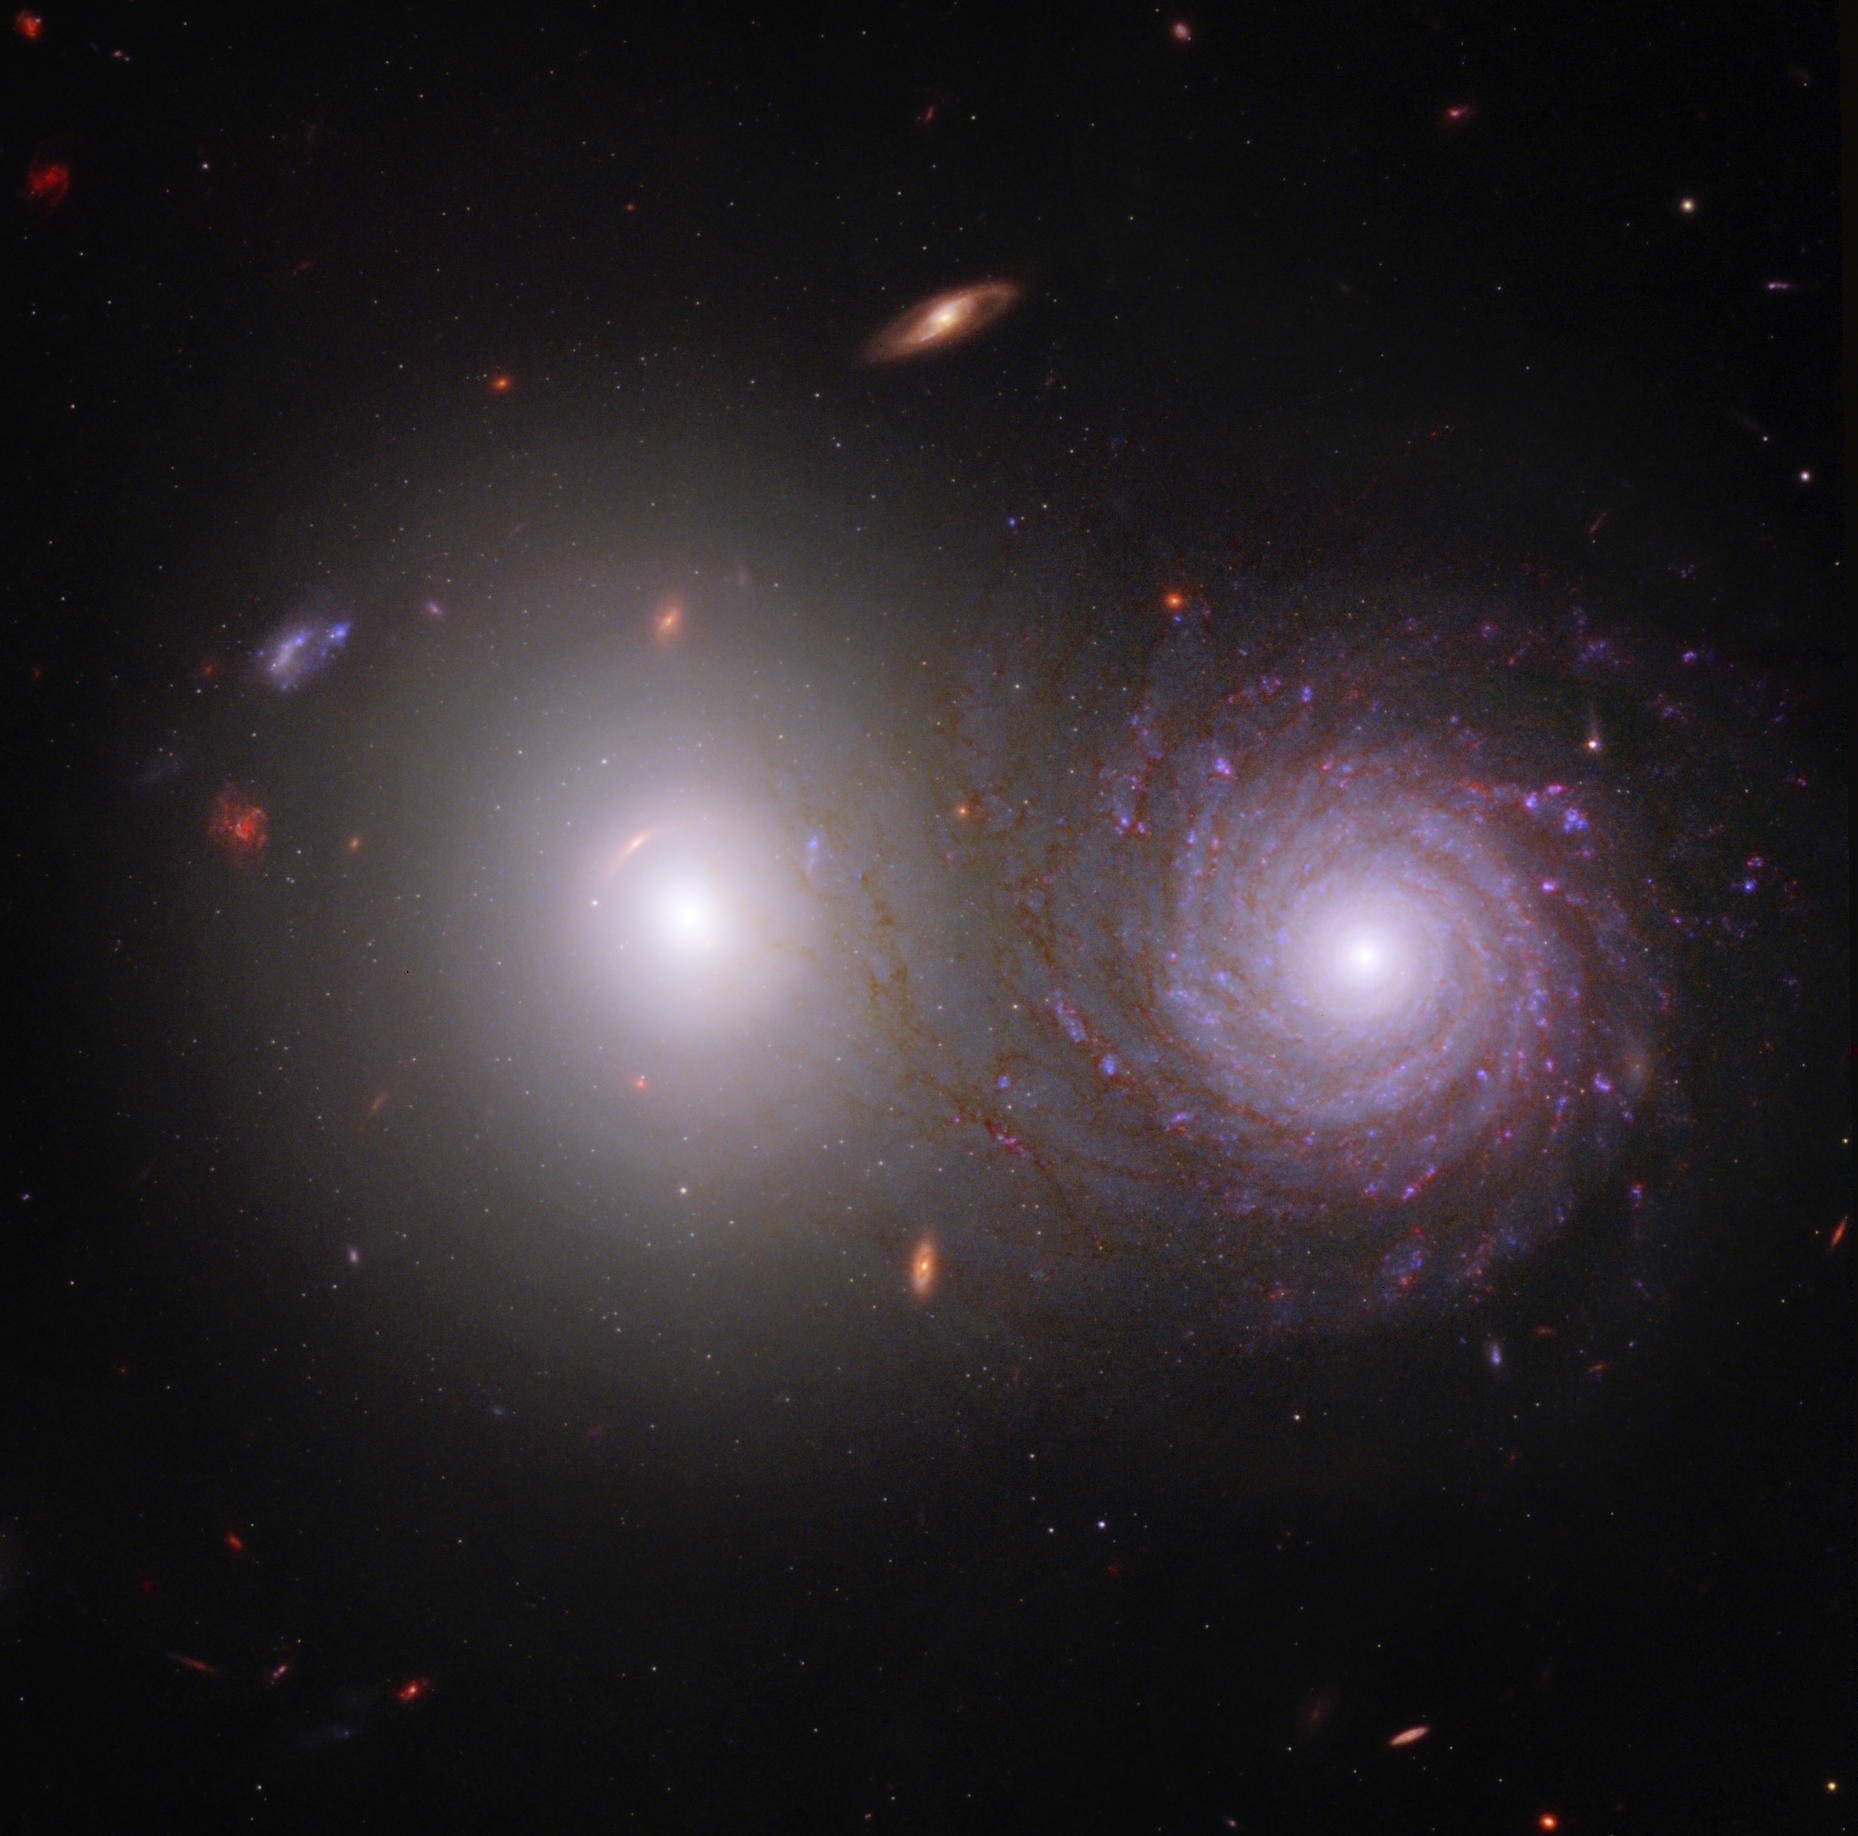 Two galaxies with the spiral in front of the elliptical